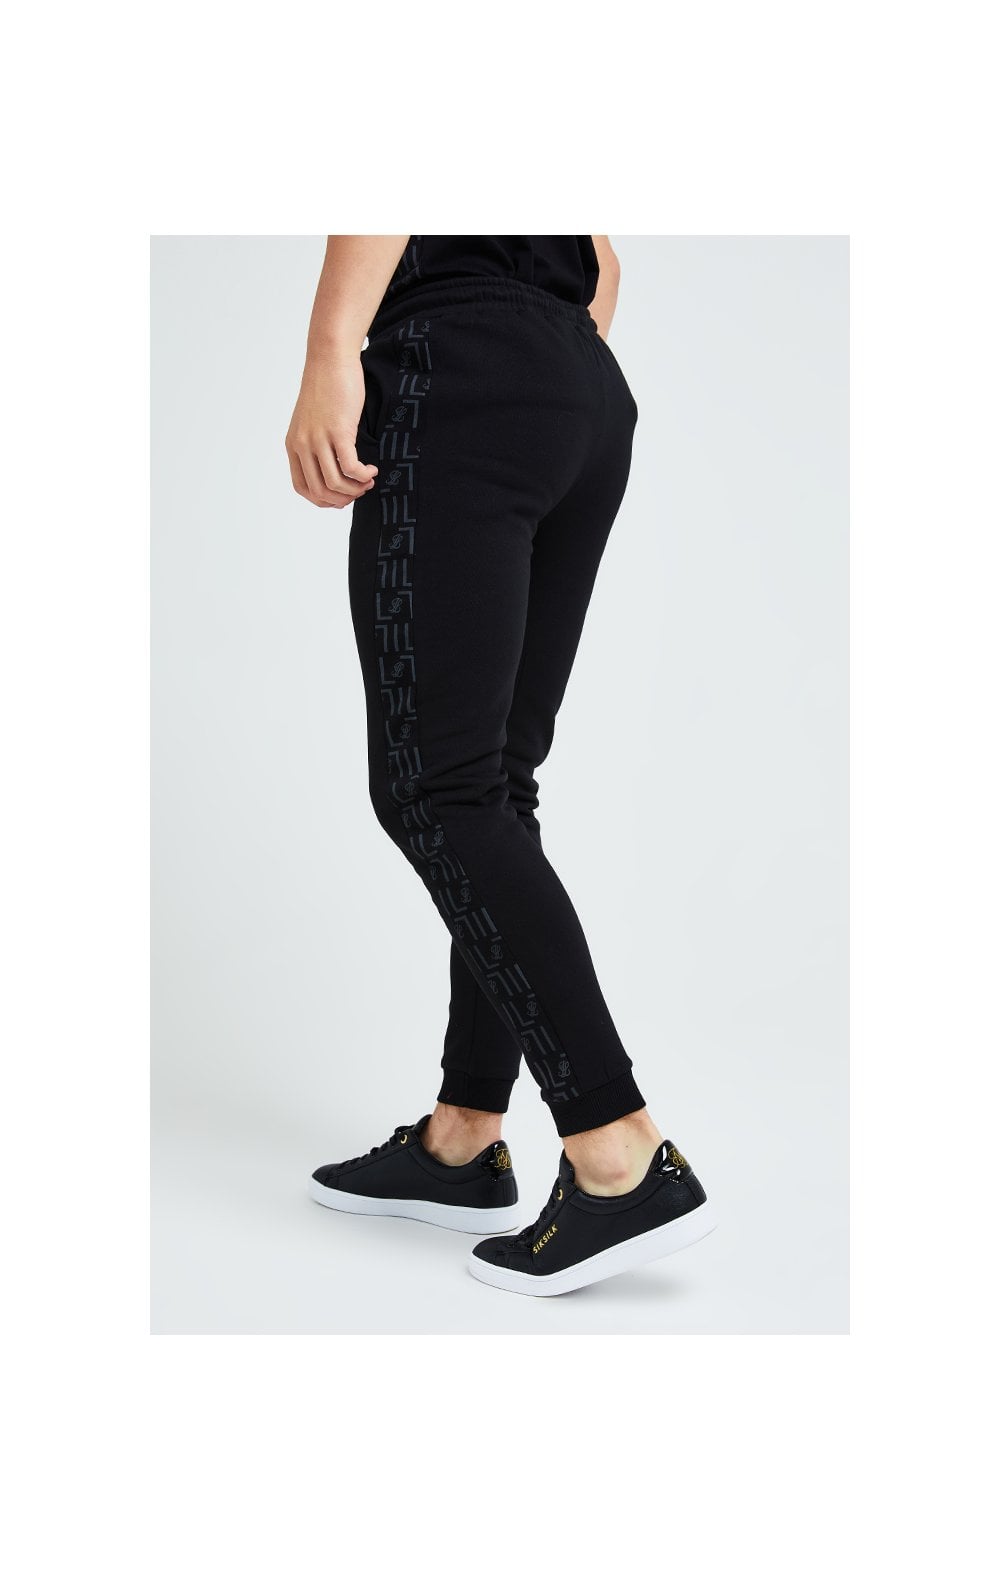 Load image into Gallery viewer, Illusive London Elite Joggers – Black (1)